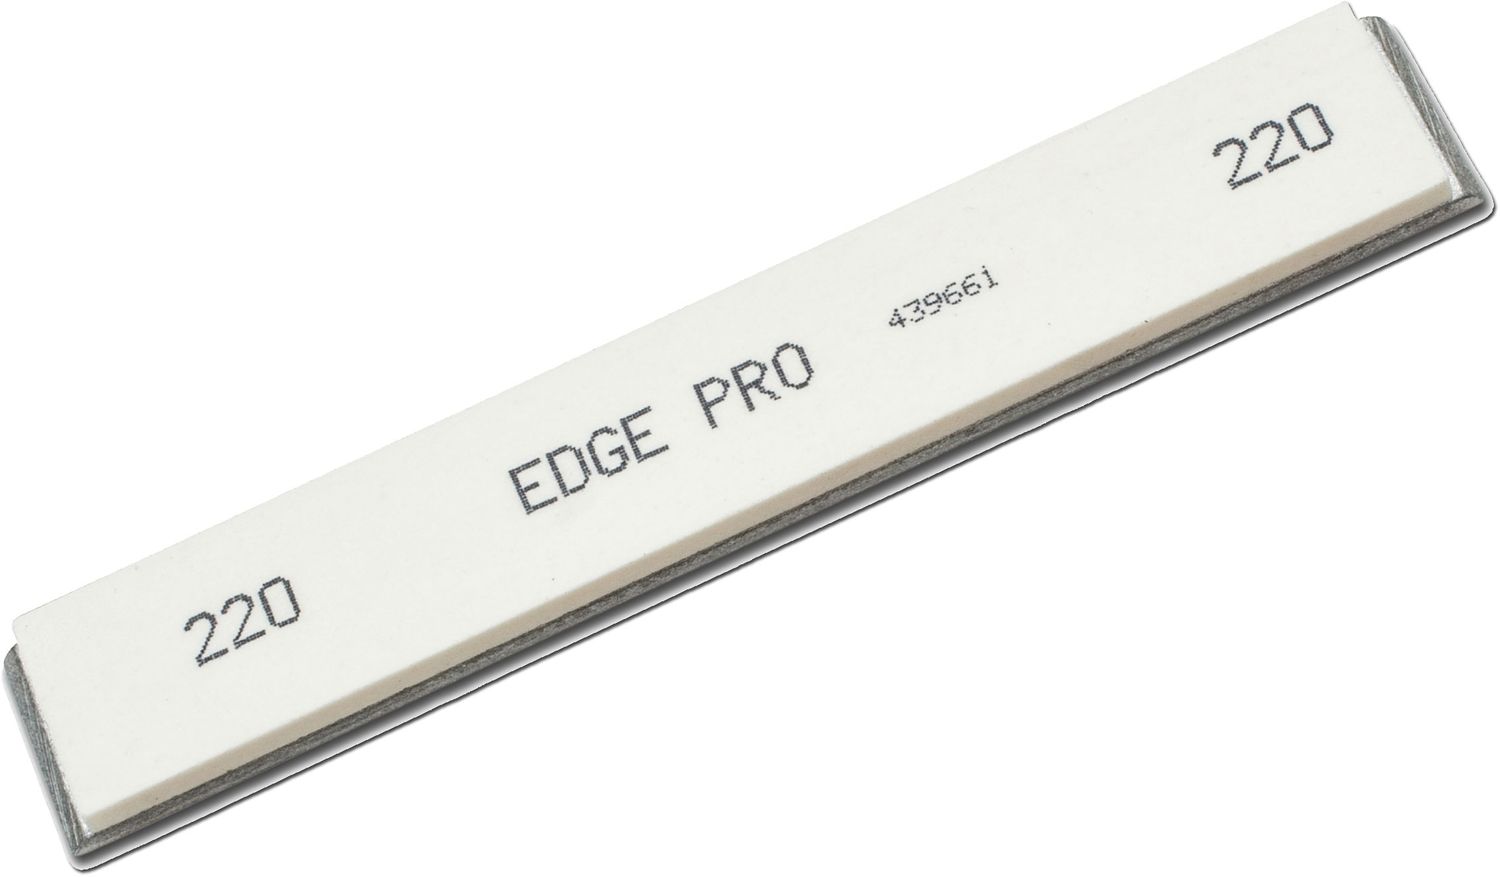 MADE IN USA NEW GENUINE EDGE PRO 1000-Grit 1" MOUNTED WATER SHARPENING STONE 